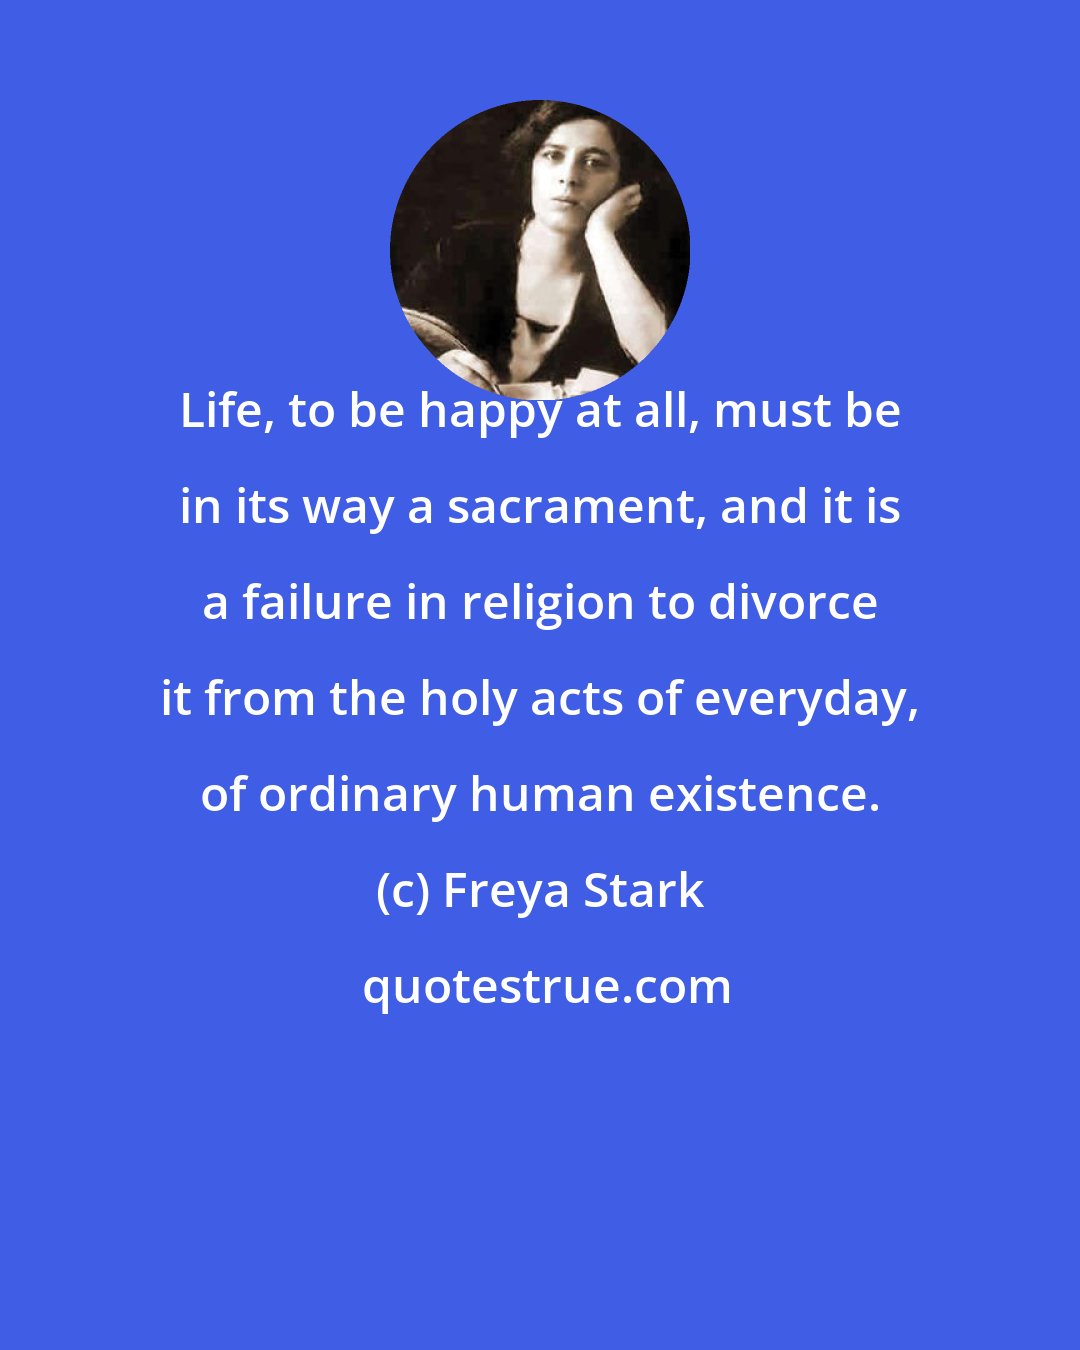 Freya Stark: Life, to be happy at all, must be in its way a sacrament, and it is a failure in religion to divorce it from the holy acts of everyday, of ordinary human existence.